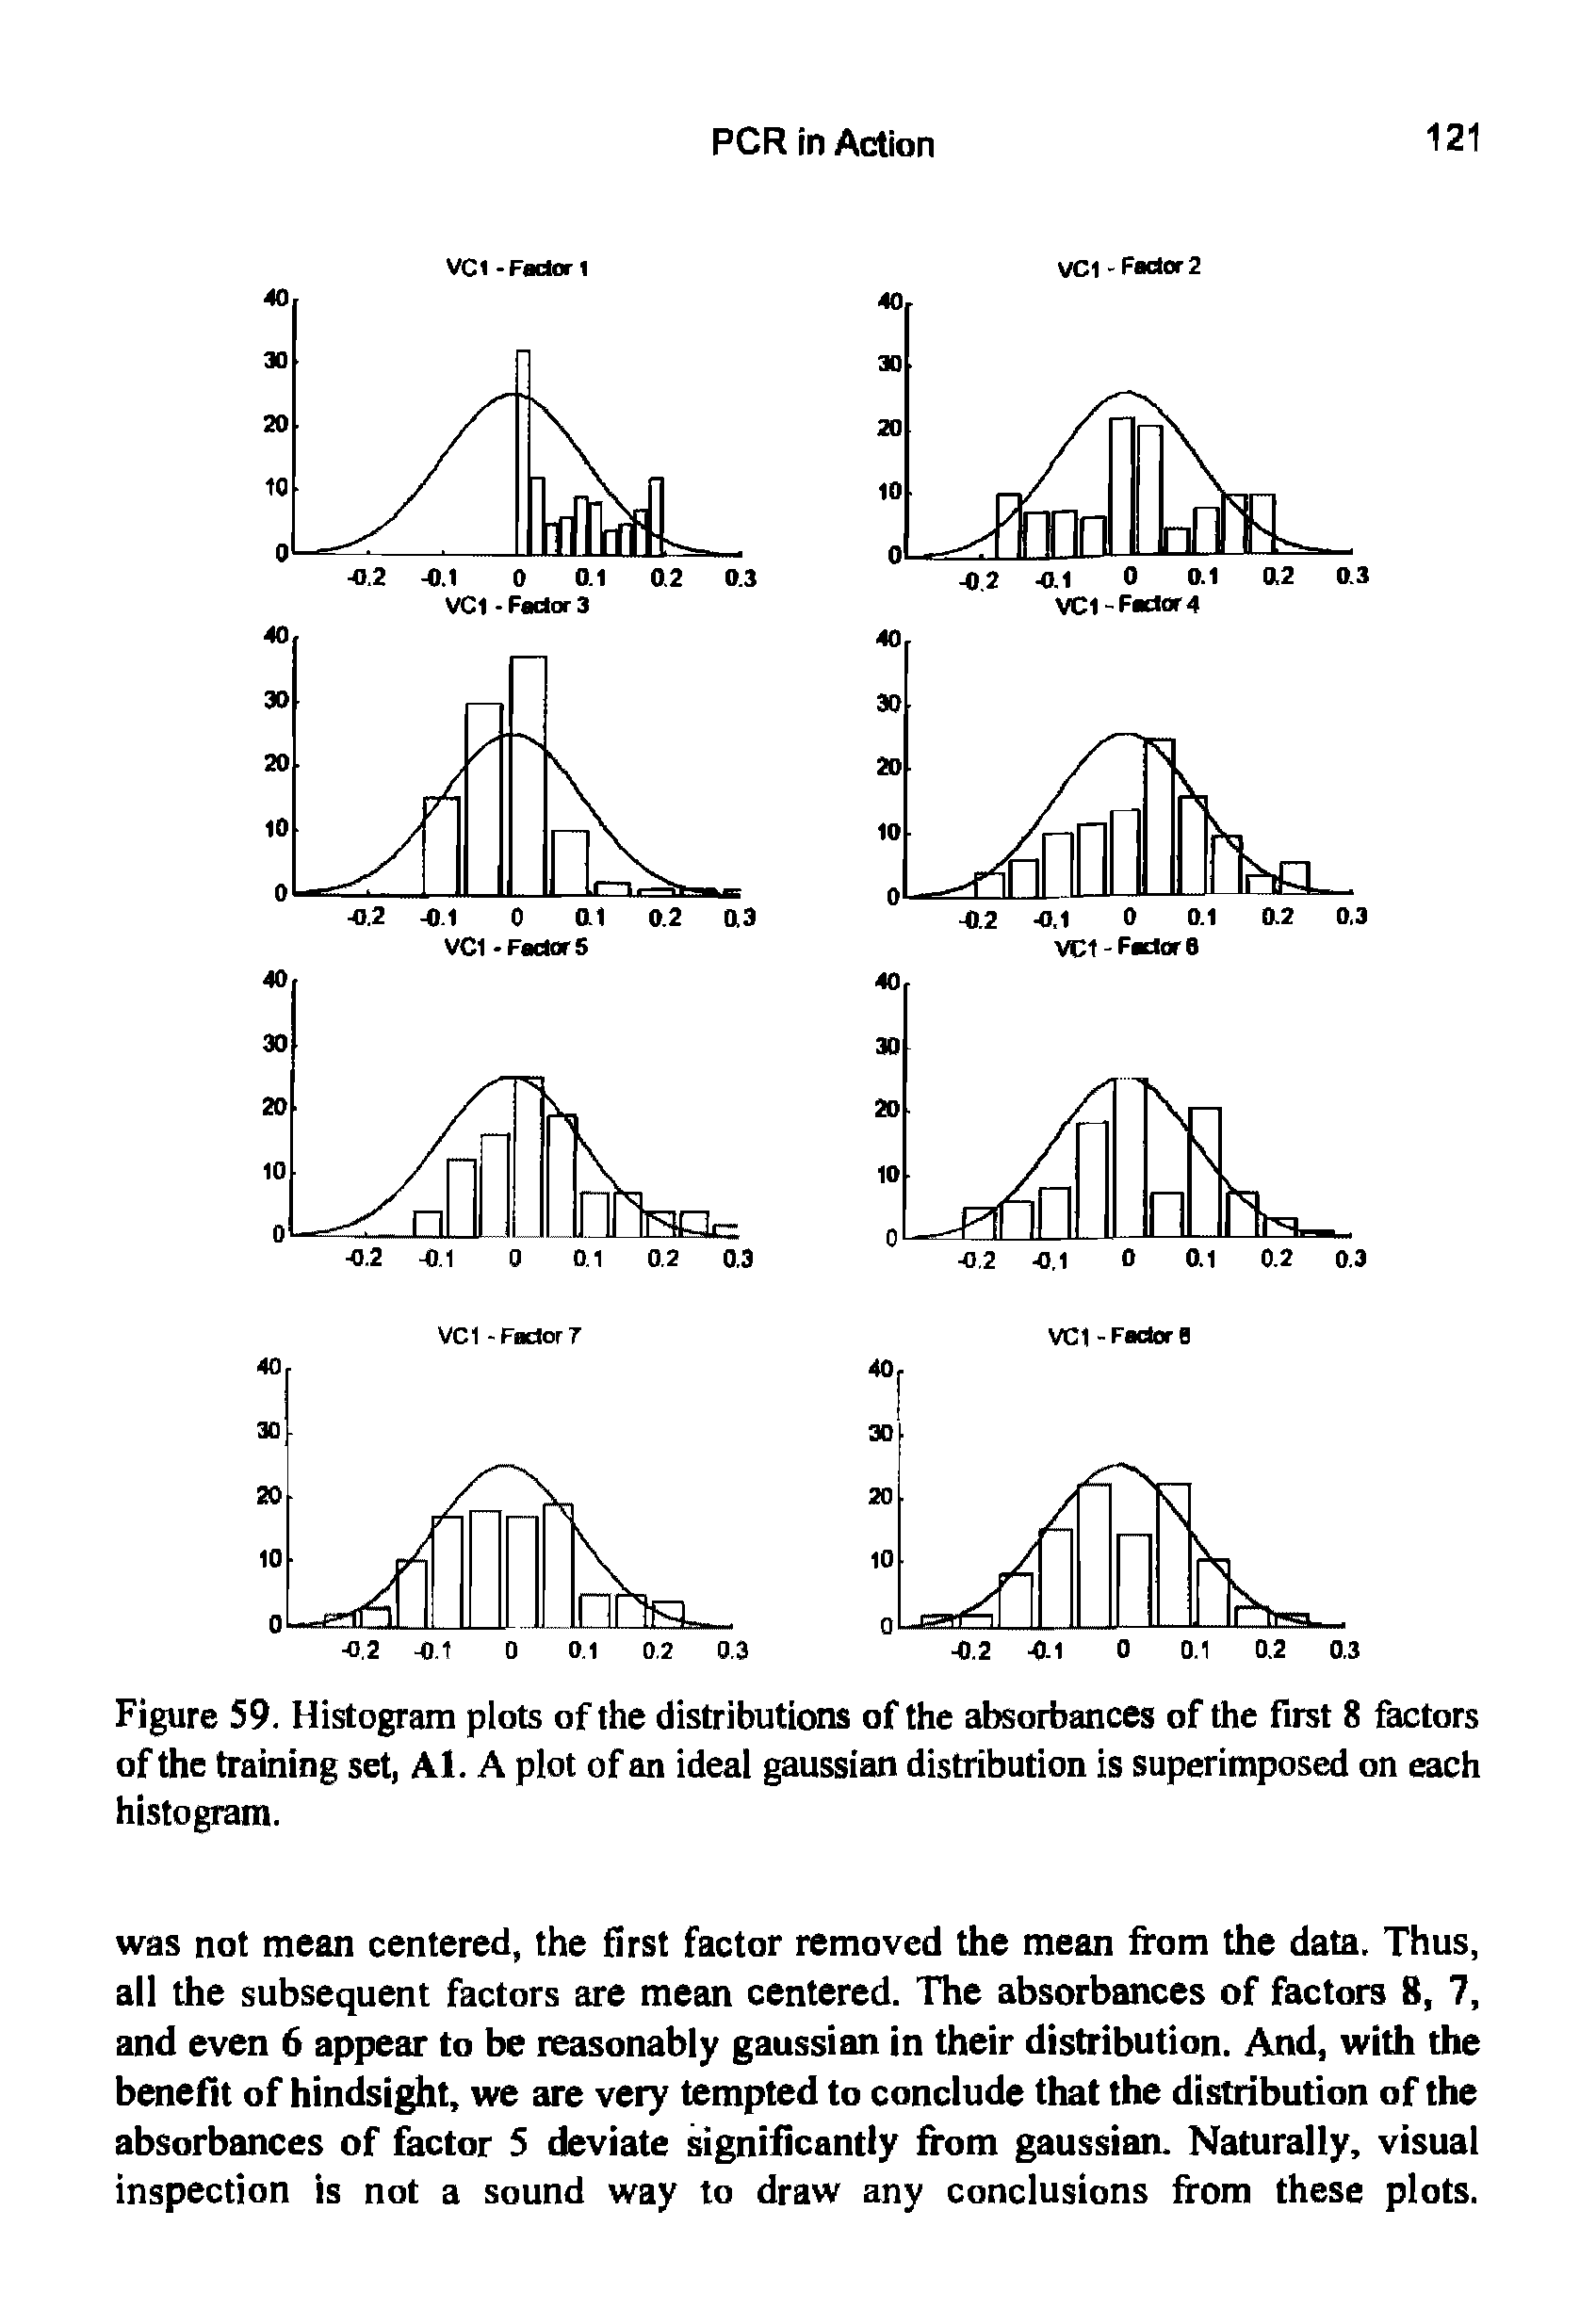 Figure 59. Histogram plots of the distributions of the absorbances of the first 8 factors of the training set, Al. A plot of an ideal gaussian distribution is superimposed on each histogram.